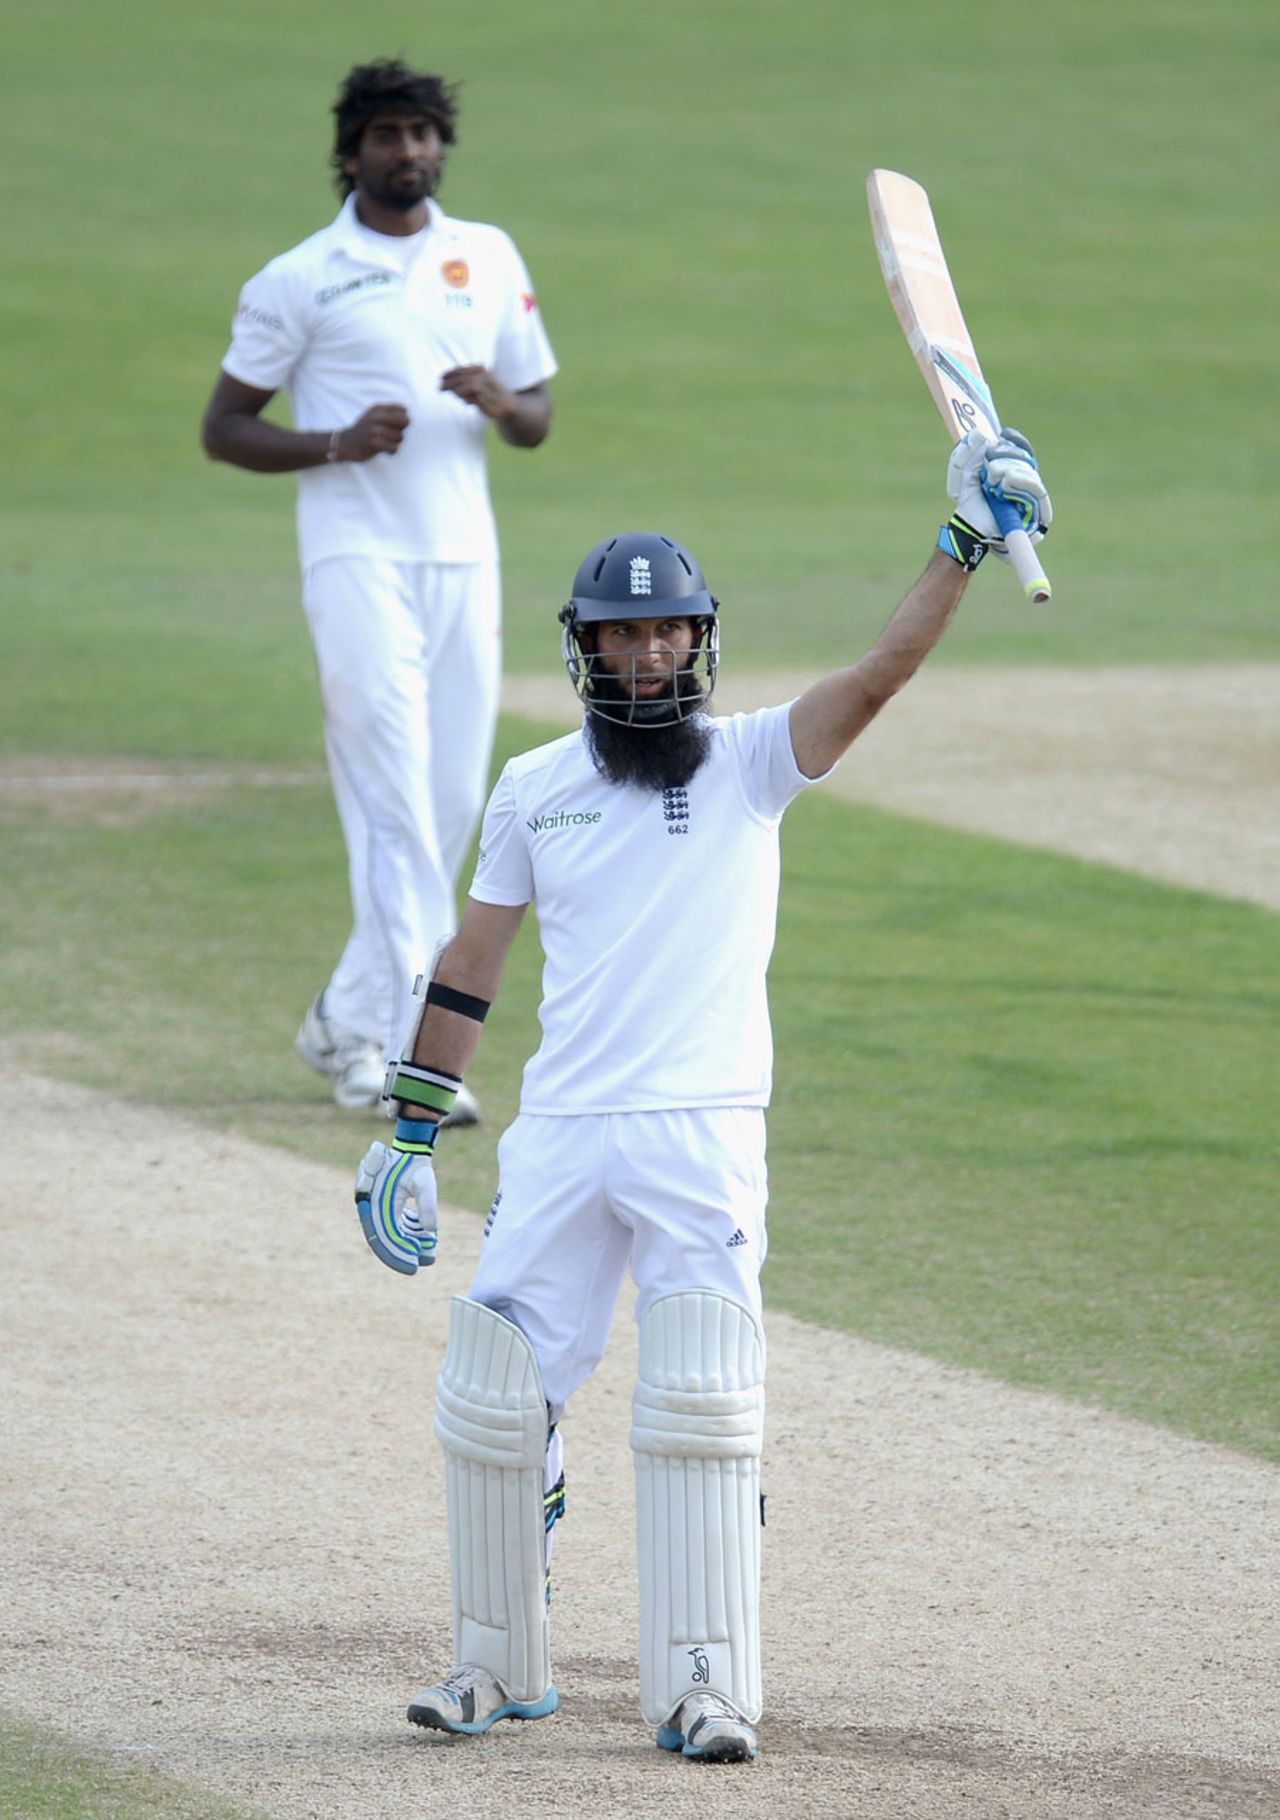 Moeen Ali reached his maiden Test hundred, England v Sri Lanka, 2nd Investec Test, Headingley, 5th day, June 24, 2014